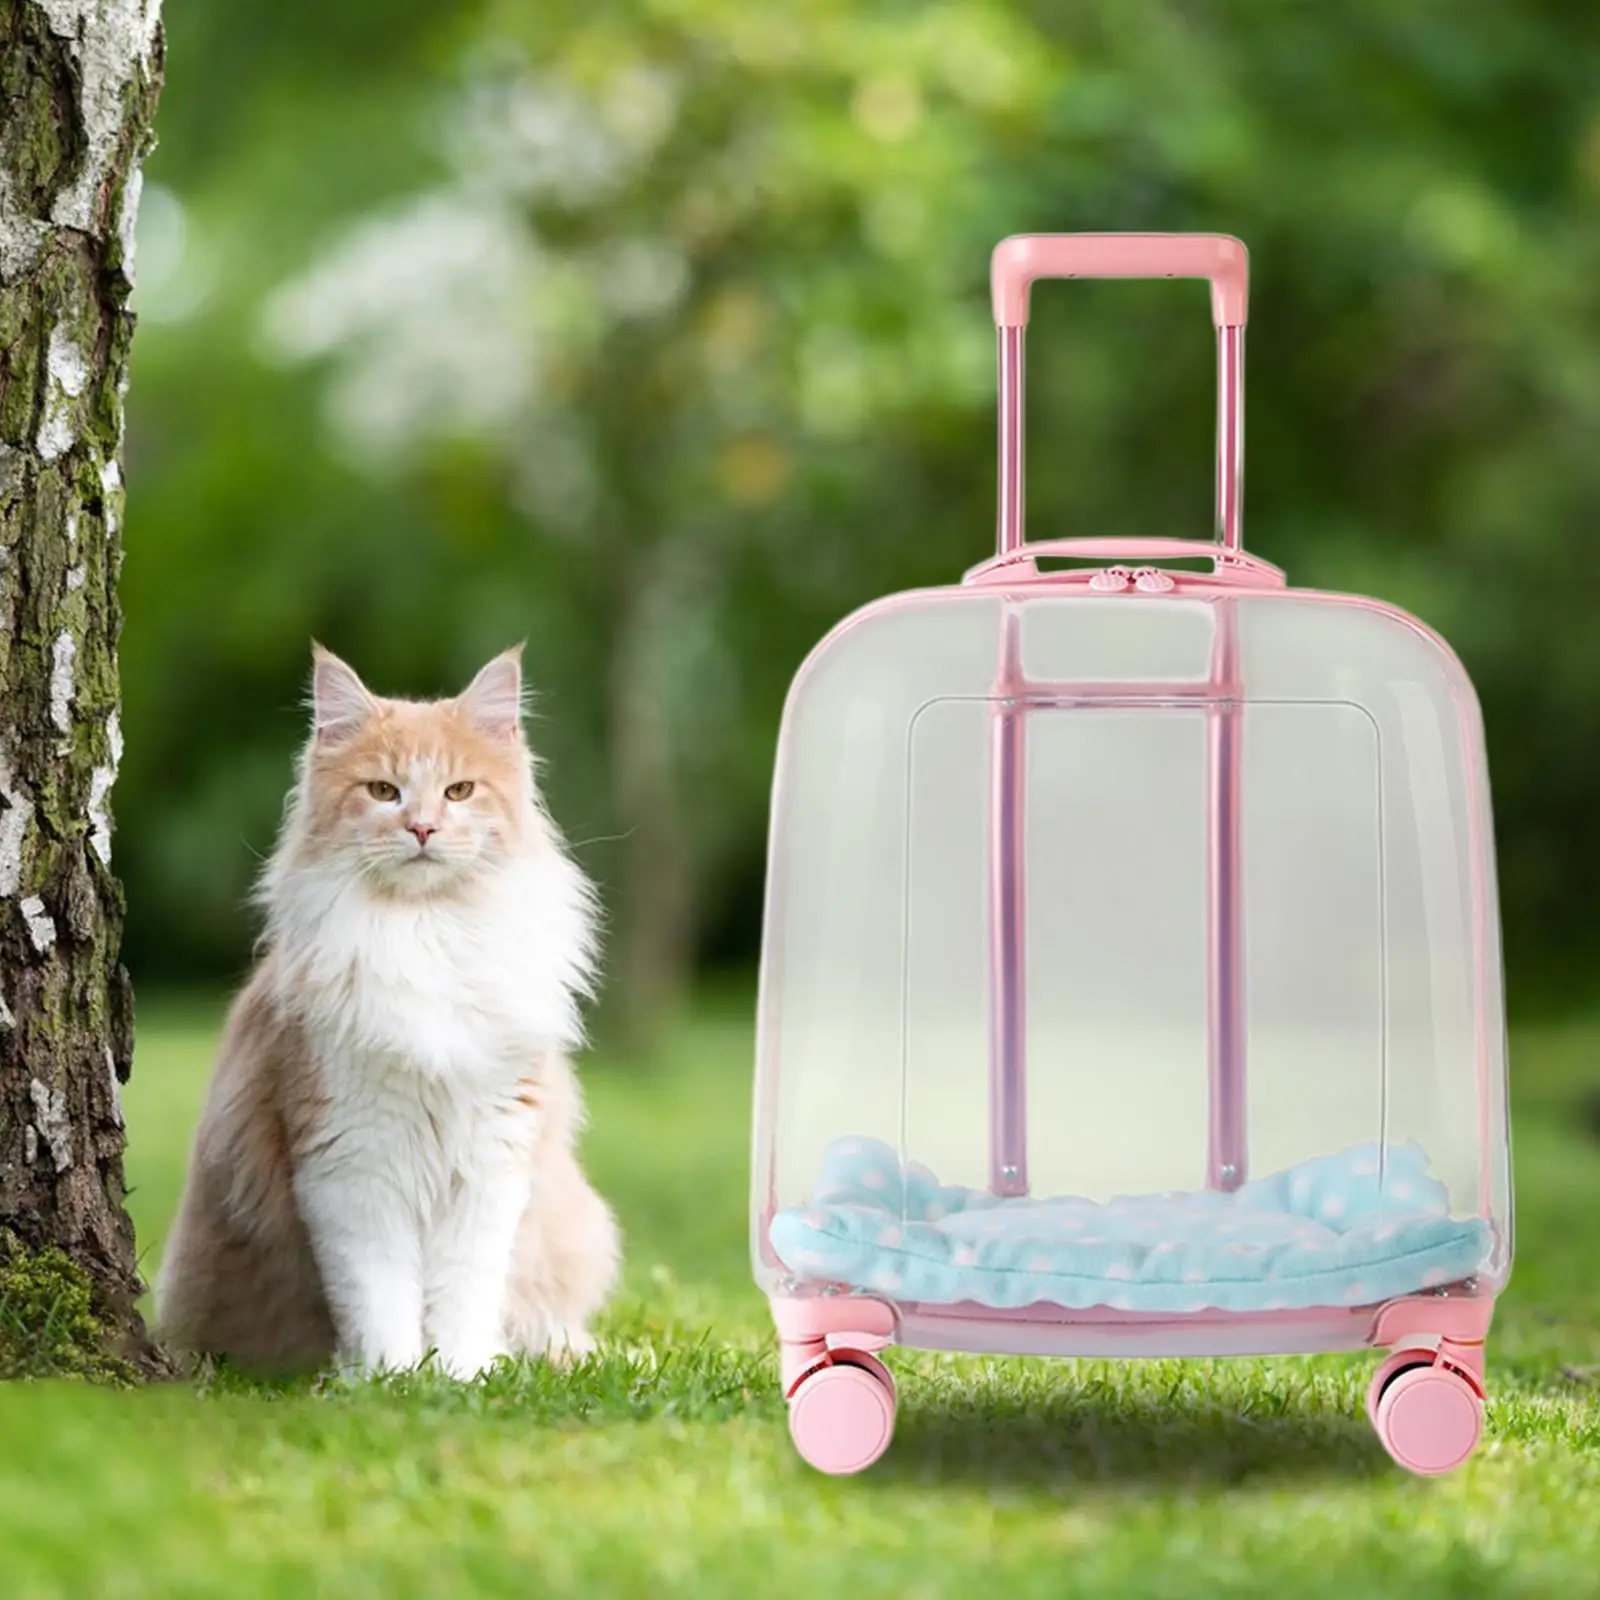 Cat Trolley Case Dog Handbag Breathable with Handle Pet Rolling Carrier for Small Animals Kitten Kitty Outdoor Traveling Hiking